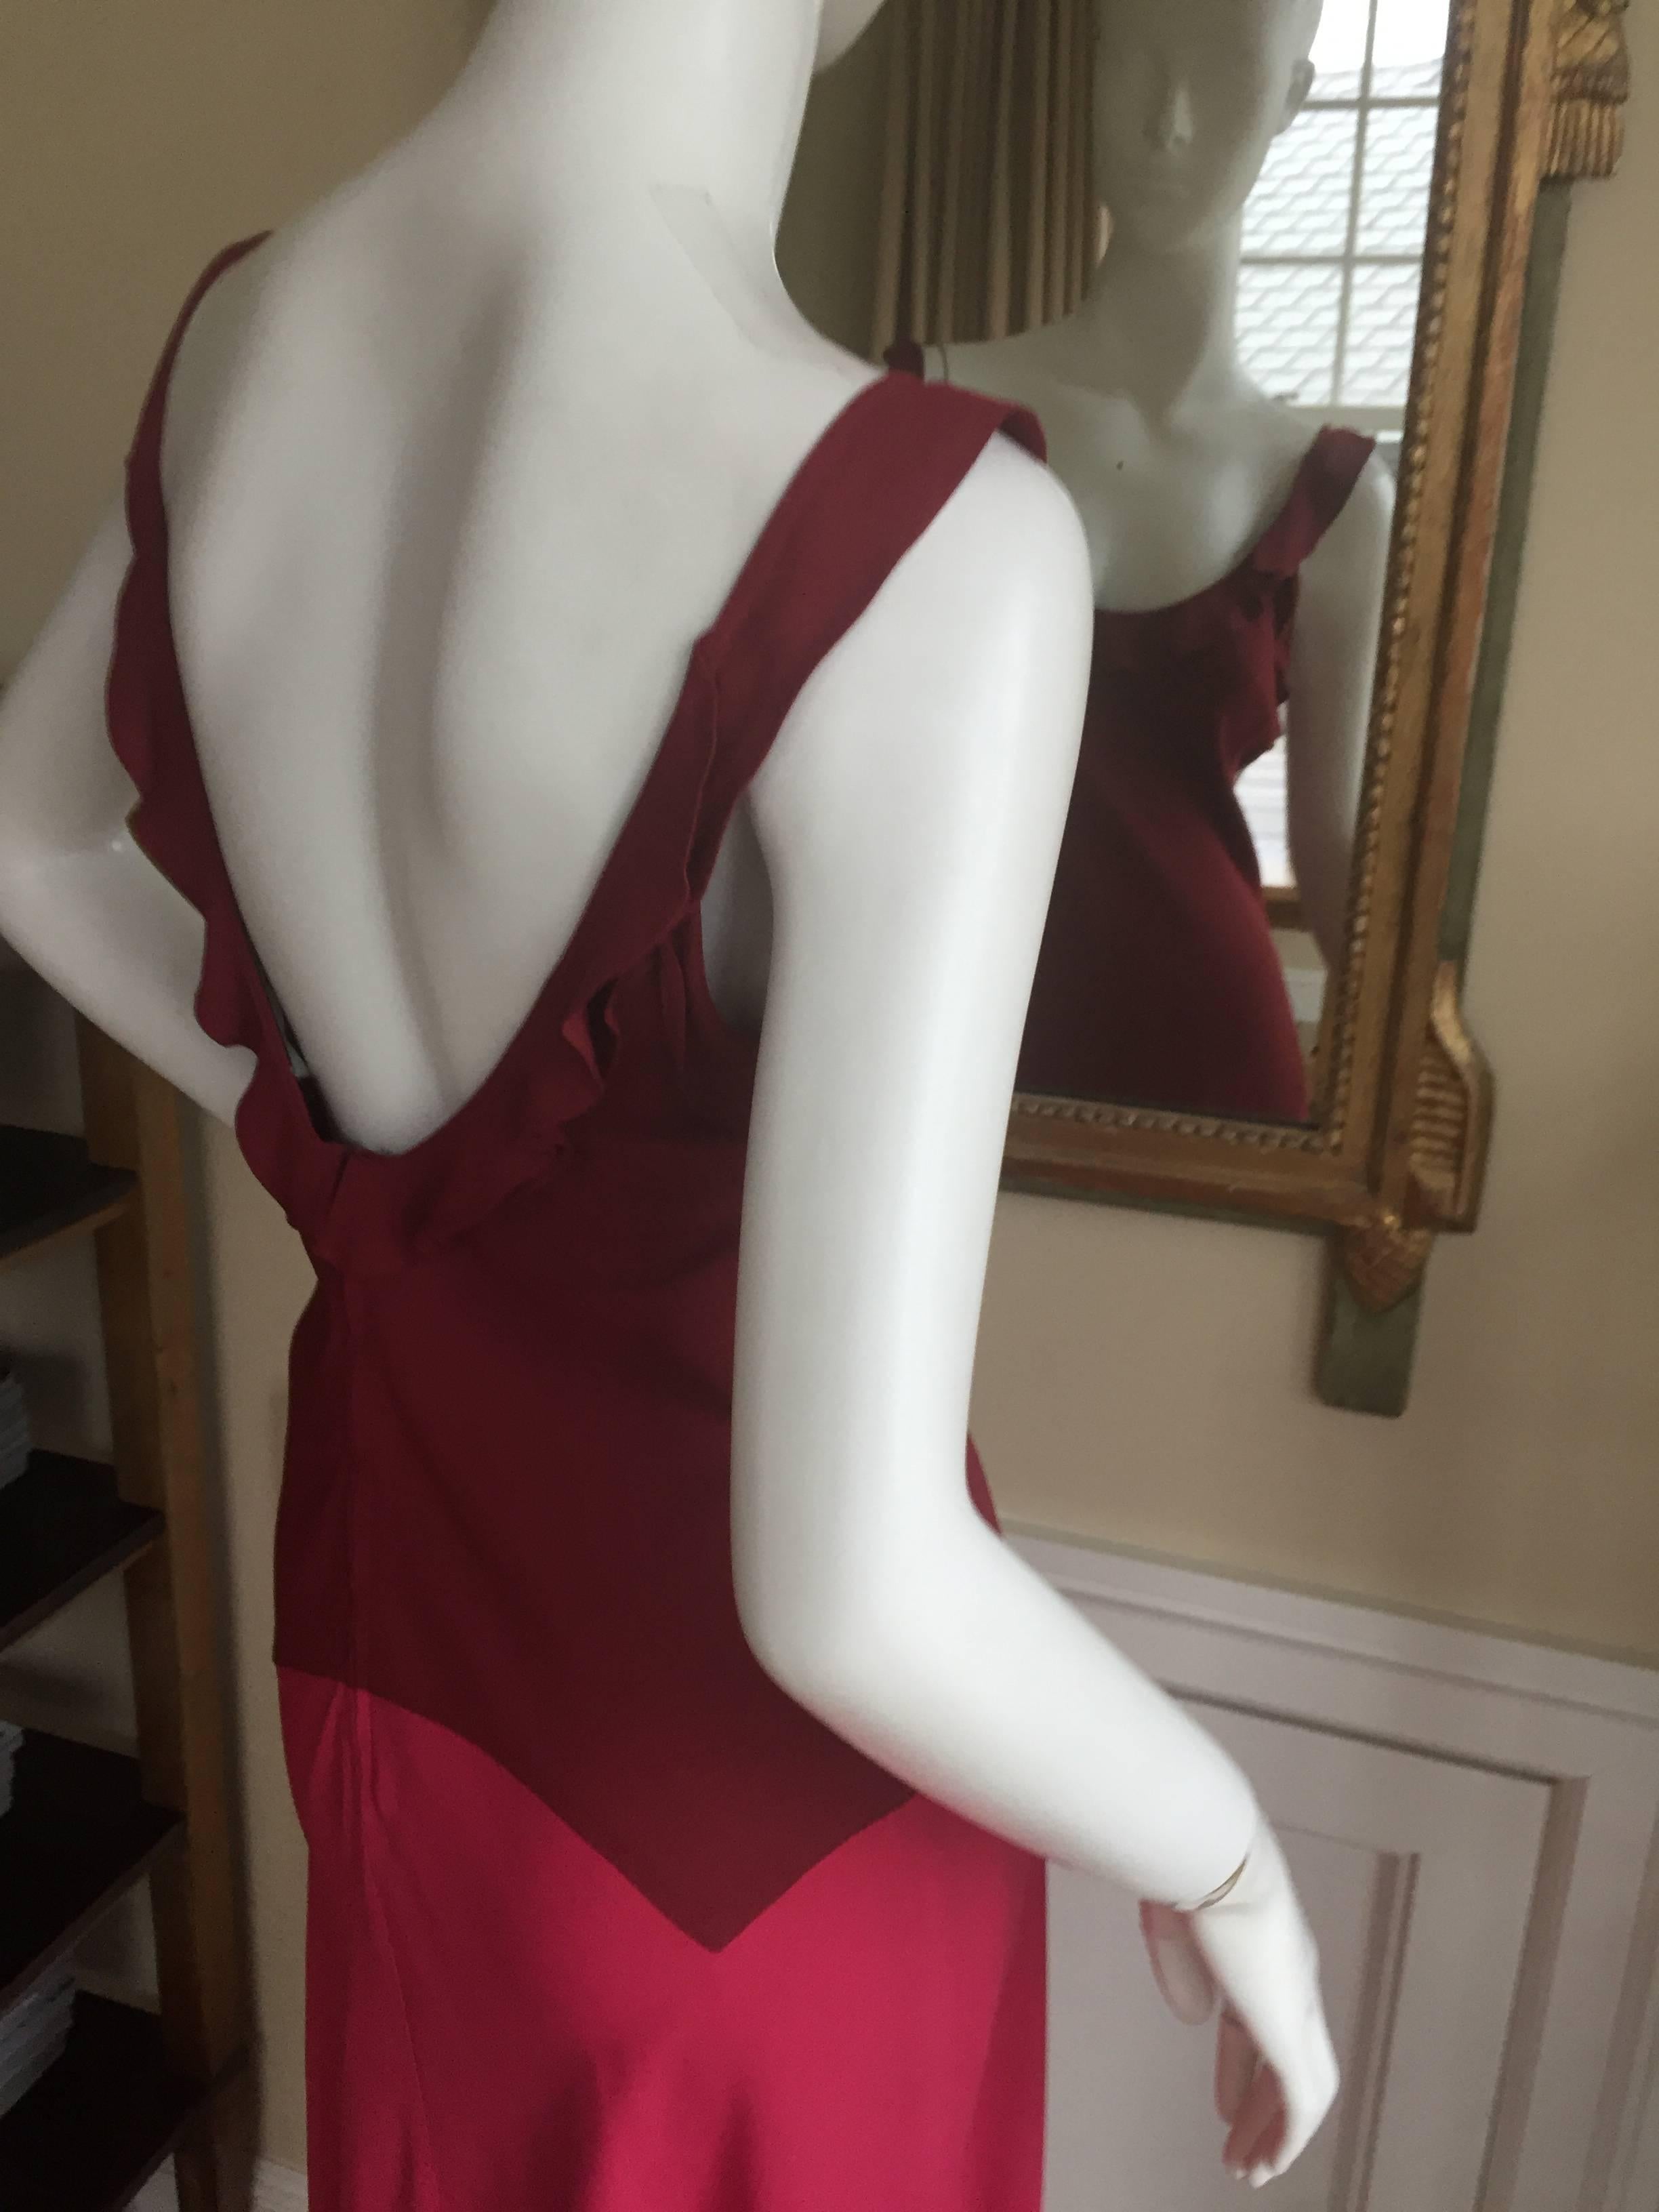 Yves Saint Laurent by Tom Ford Rose Silk Dress In Excellent Condition For Sale In Cloverdale, CA